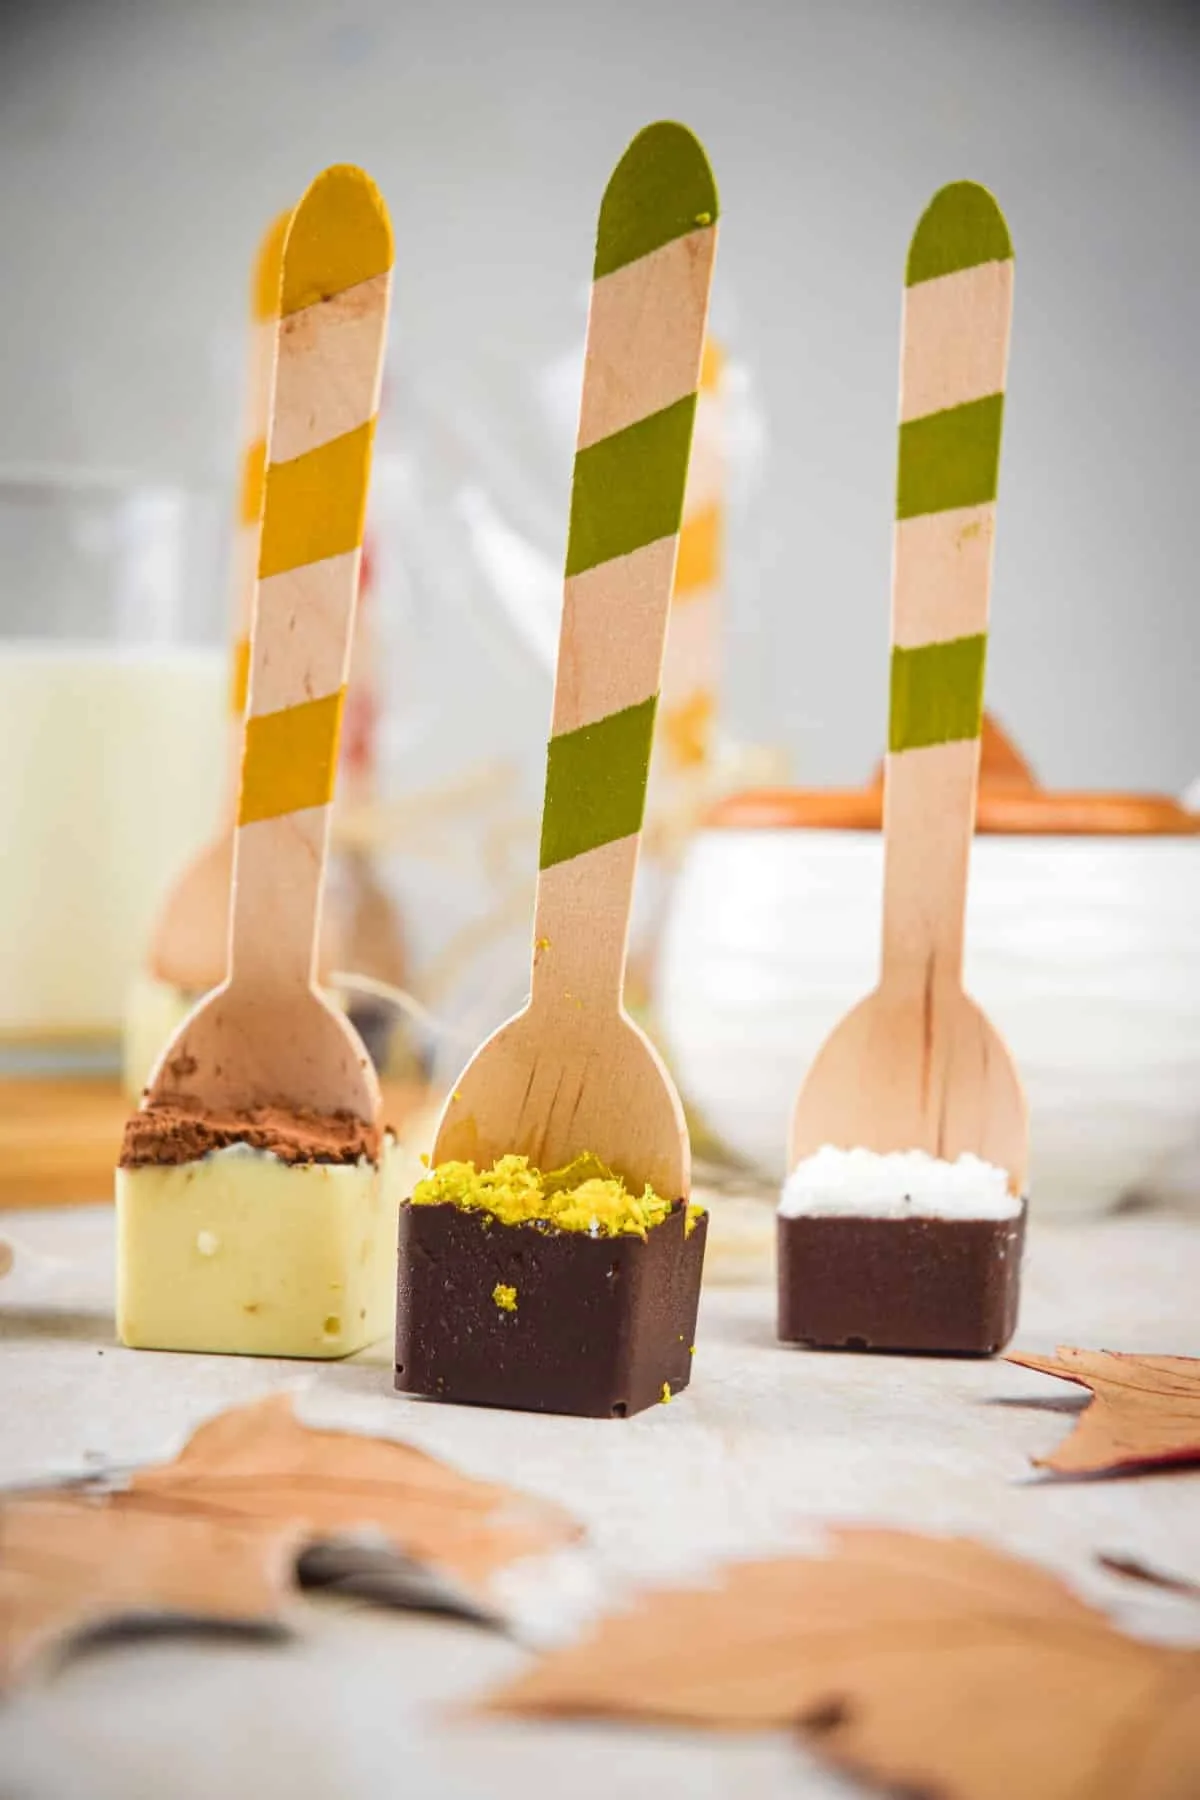 Hot chocolate spoons with different flavours.